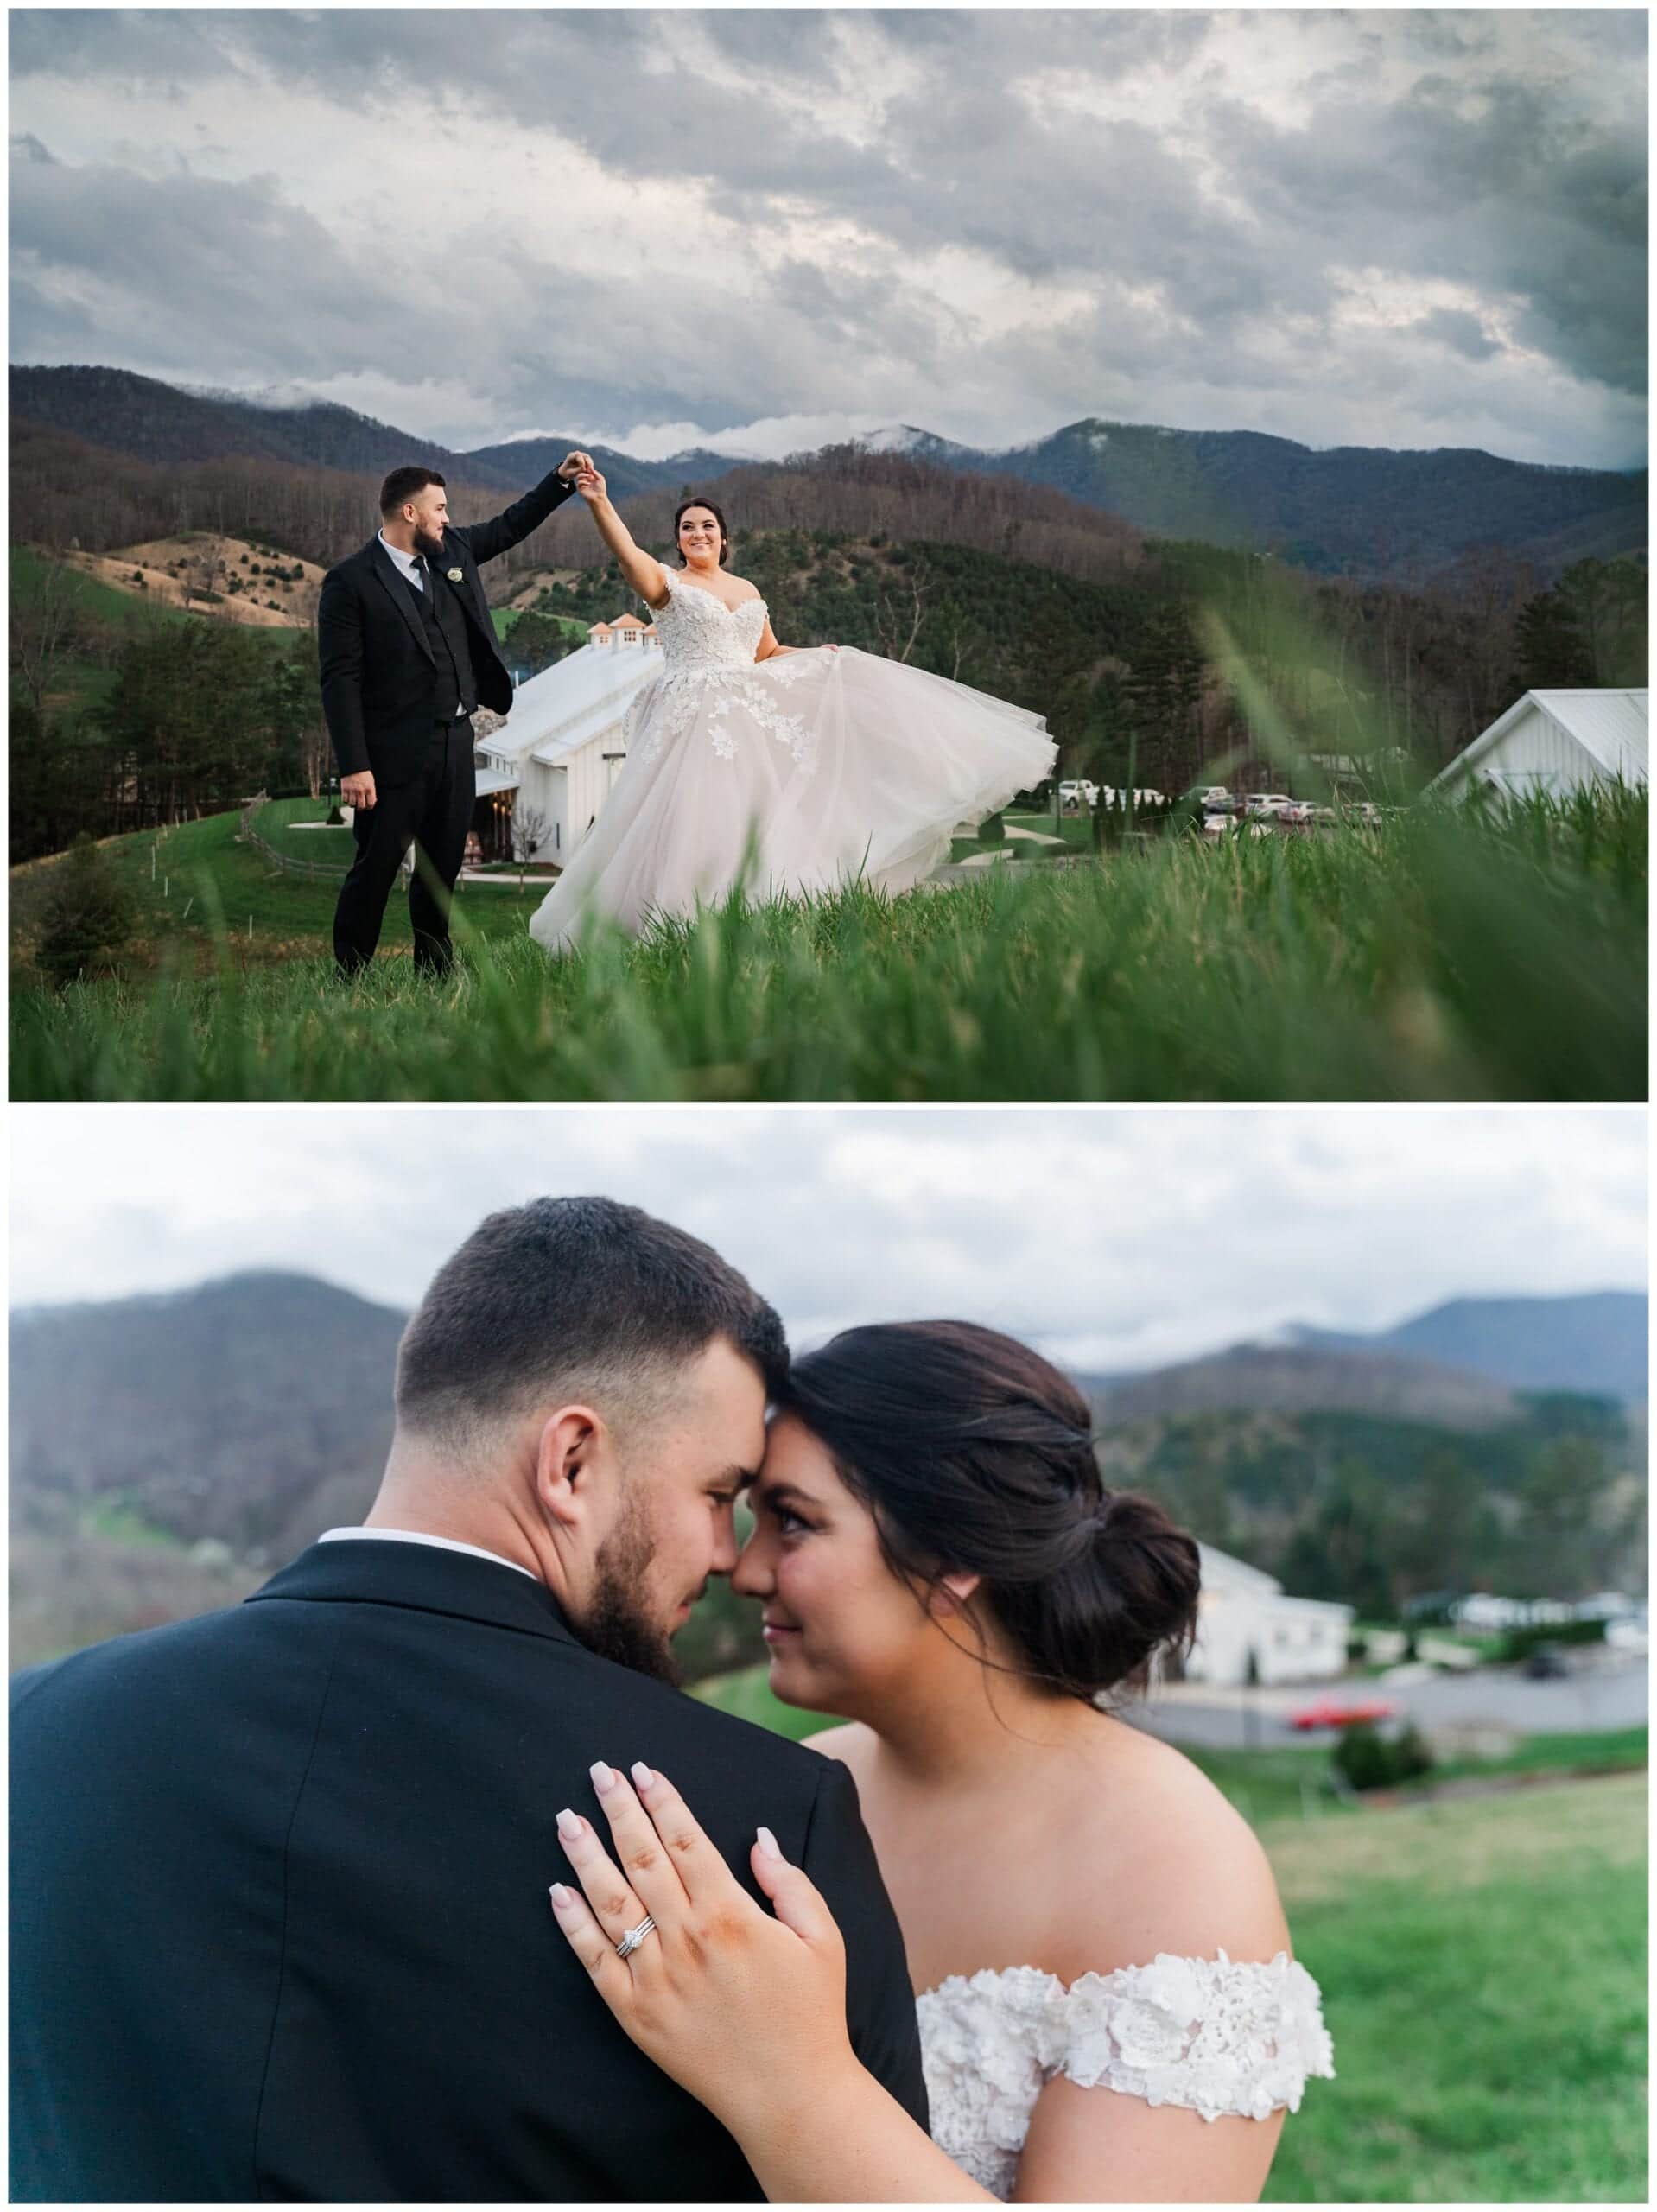 Bride and groom in field with mountains in the background